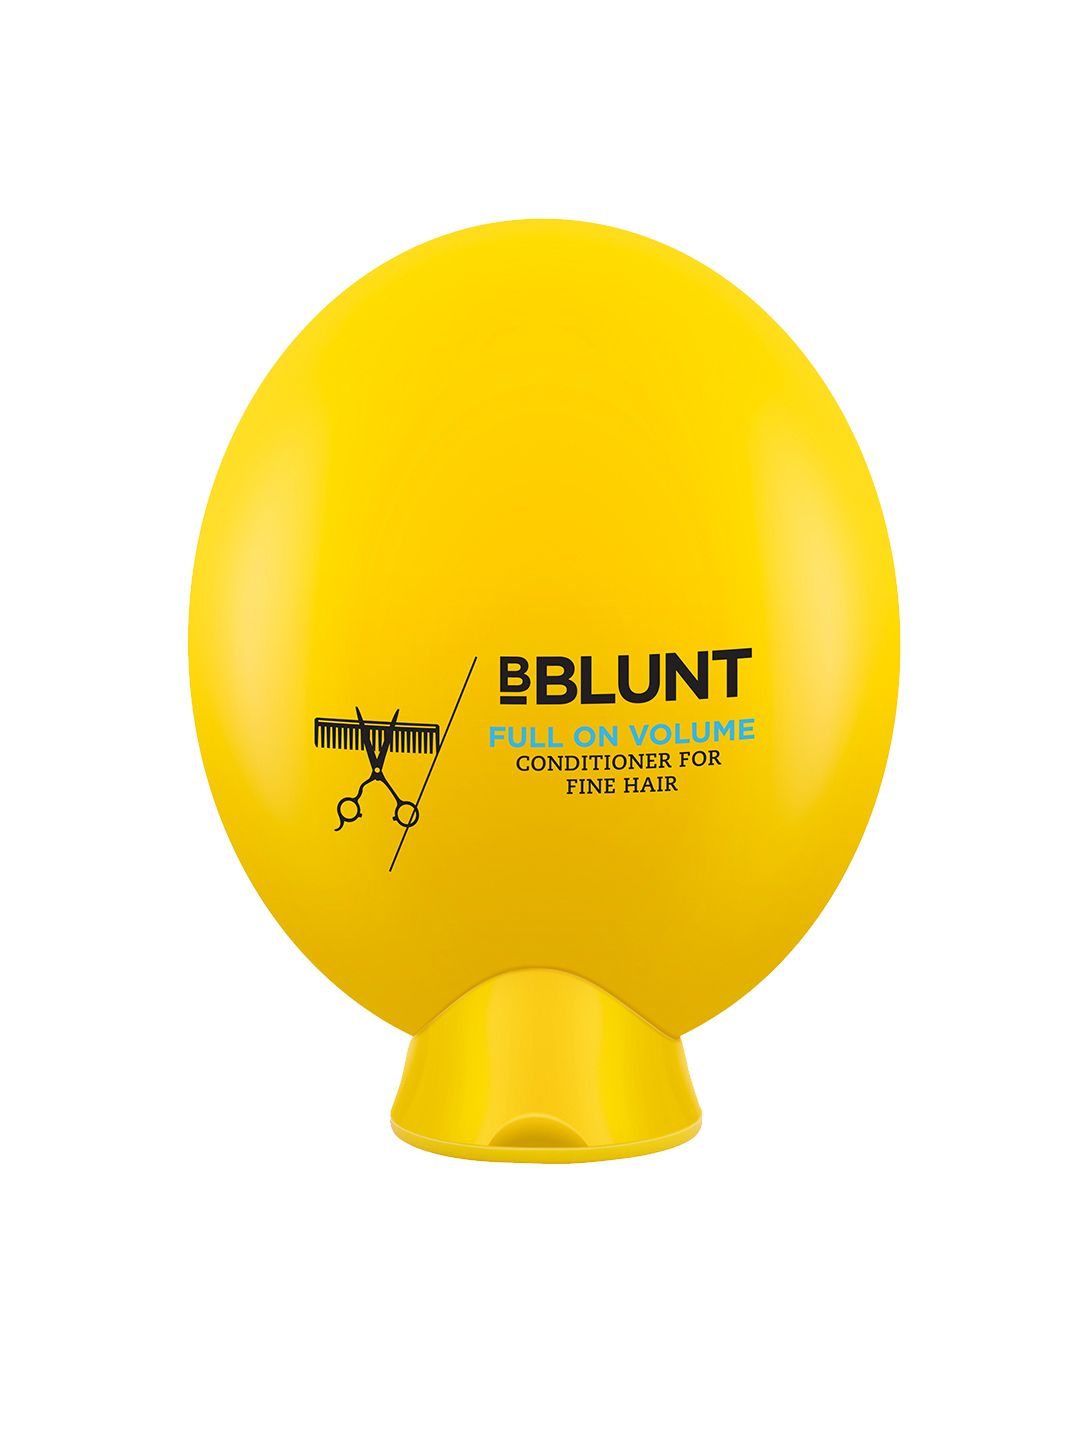 BBLUNT Full On Volume Conditioner for Fine Hair 200 g Price in India